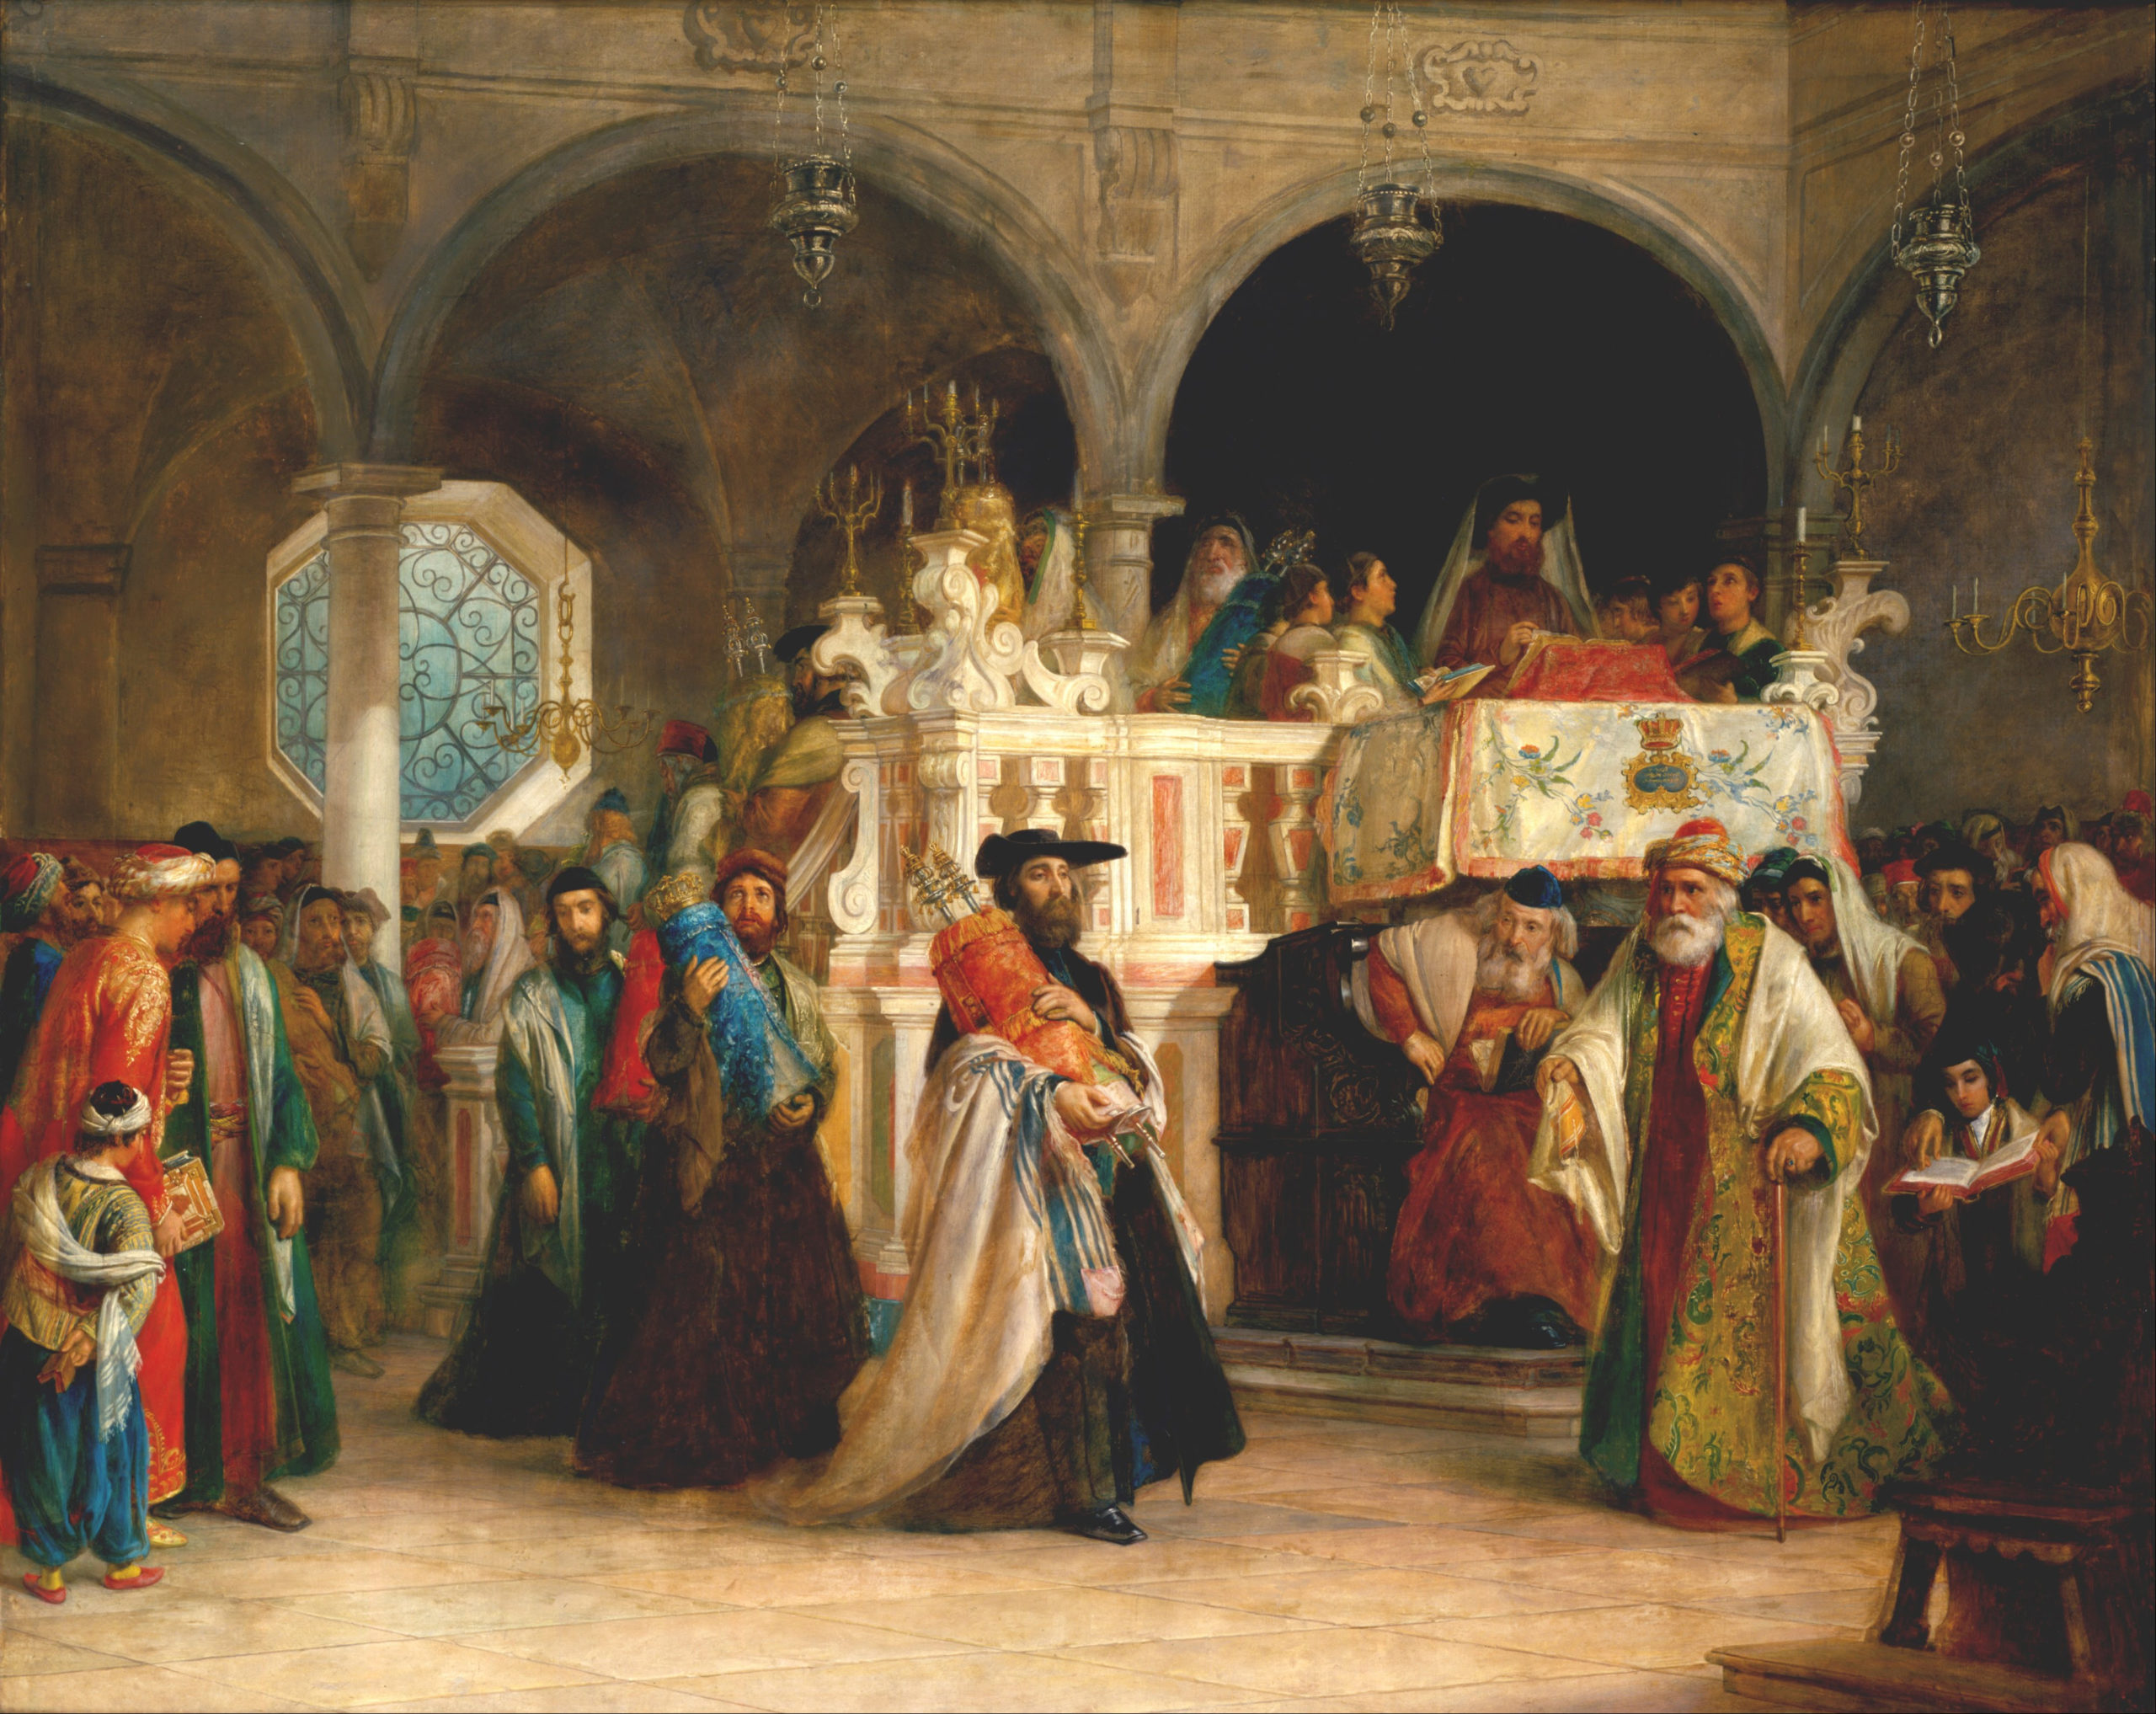 Procession of Torahs in The Feast of the Rejoicing of the Law at the Synagogue in Leghorn , Italy, Solomon Alexander Hart, 1850, oil on canvas, 141.3 x 174.6 cm (Jewish Museum)